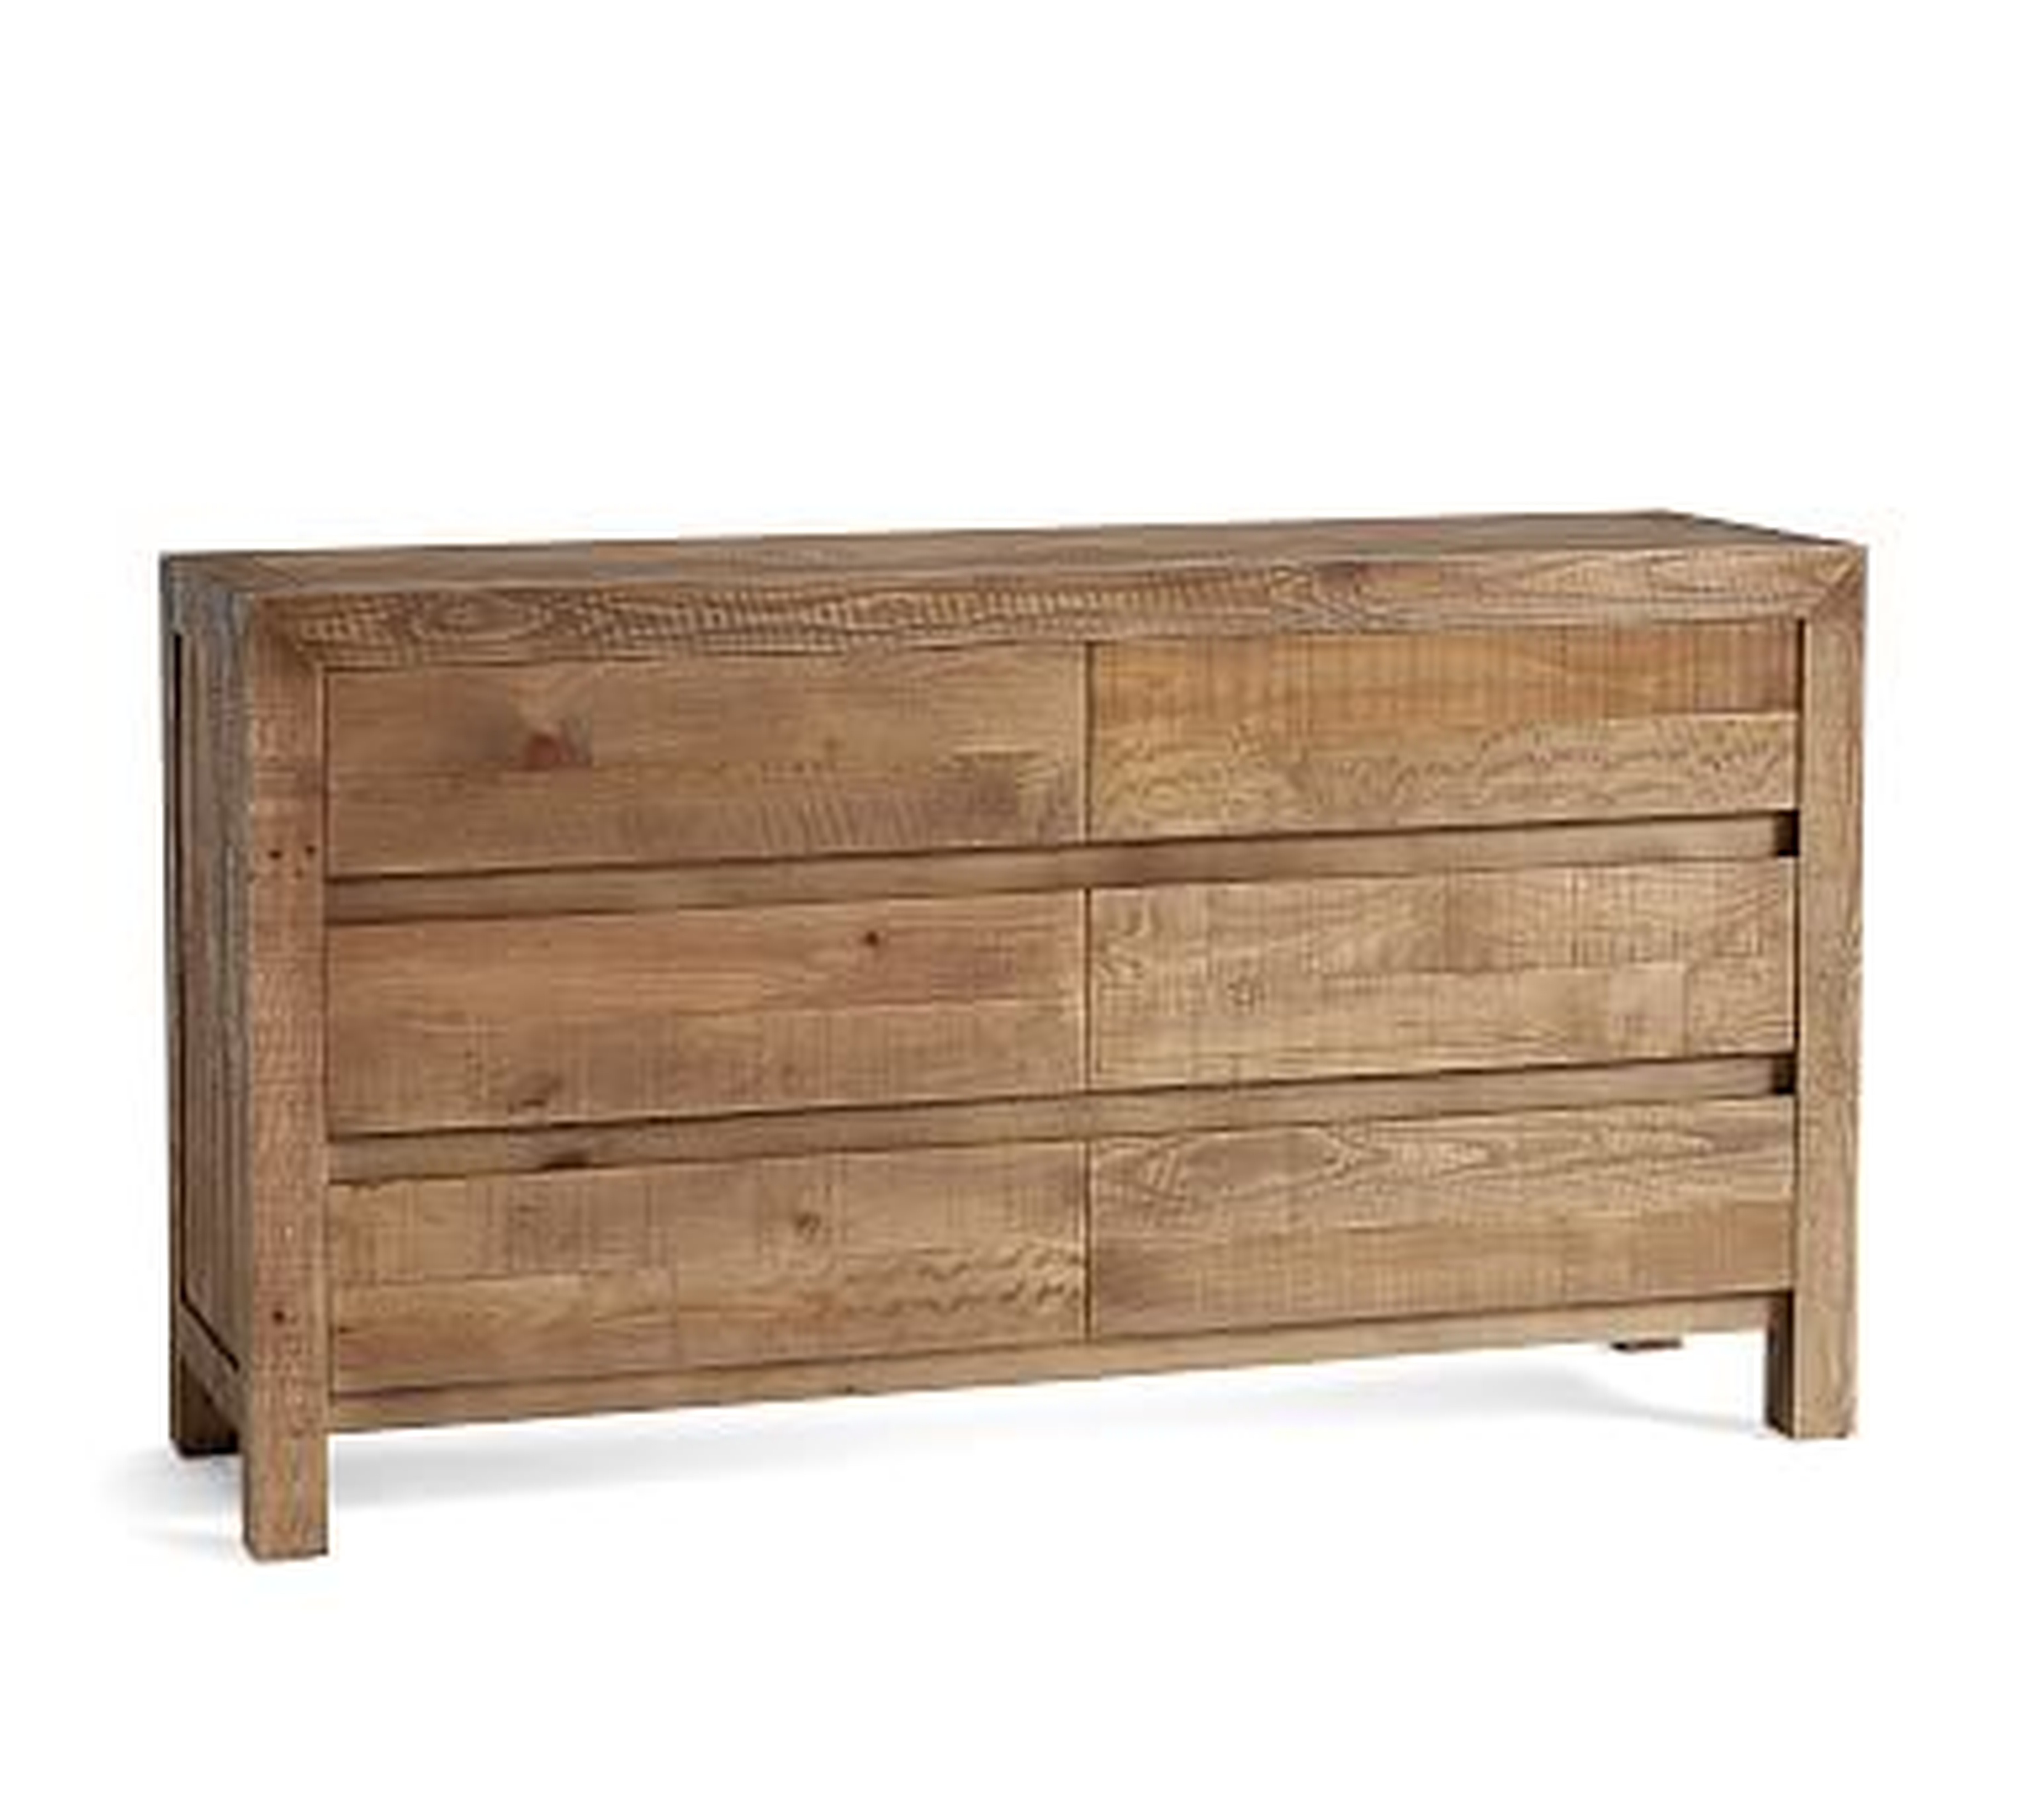 Hensley Reclaimed Wood 6-Drawer Dresser, Weathered Gray - Pottery Barn